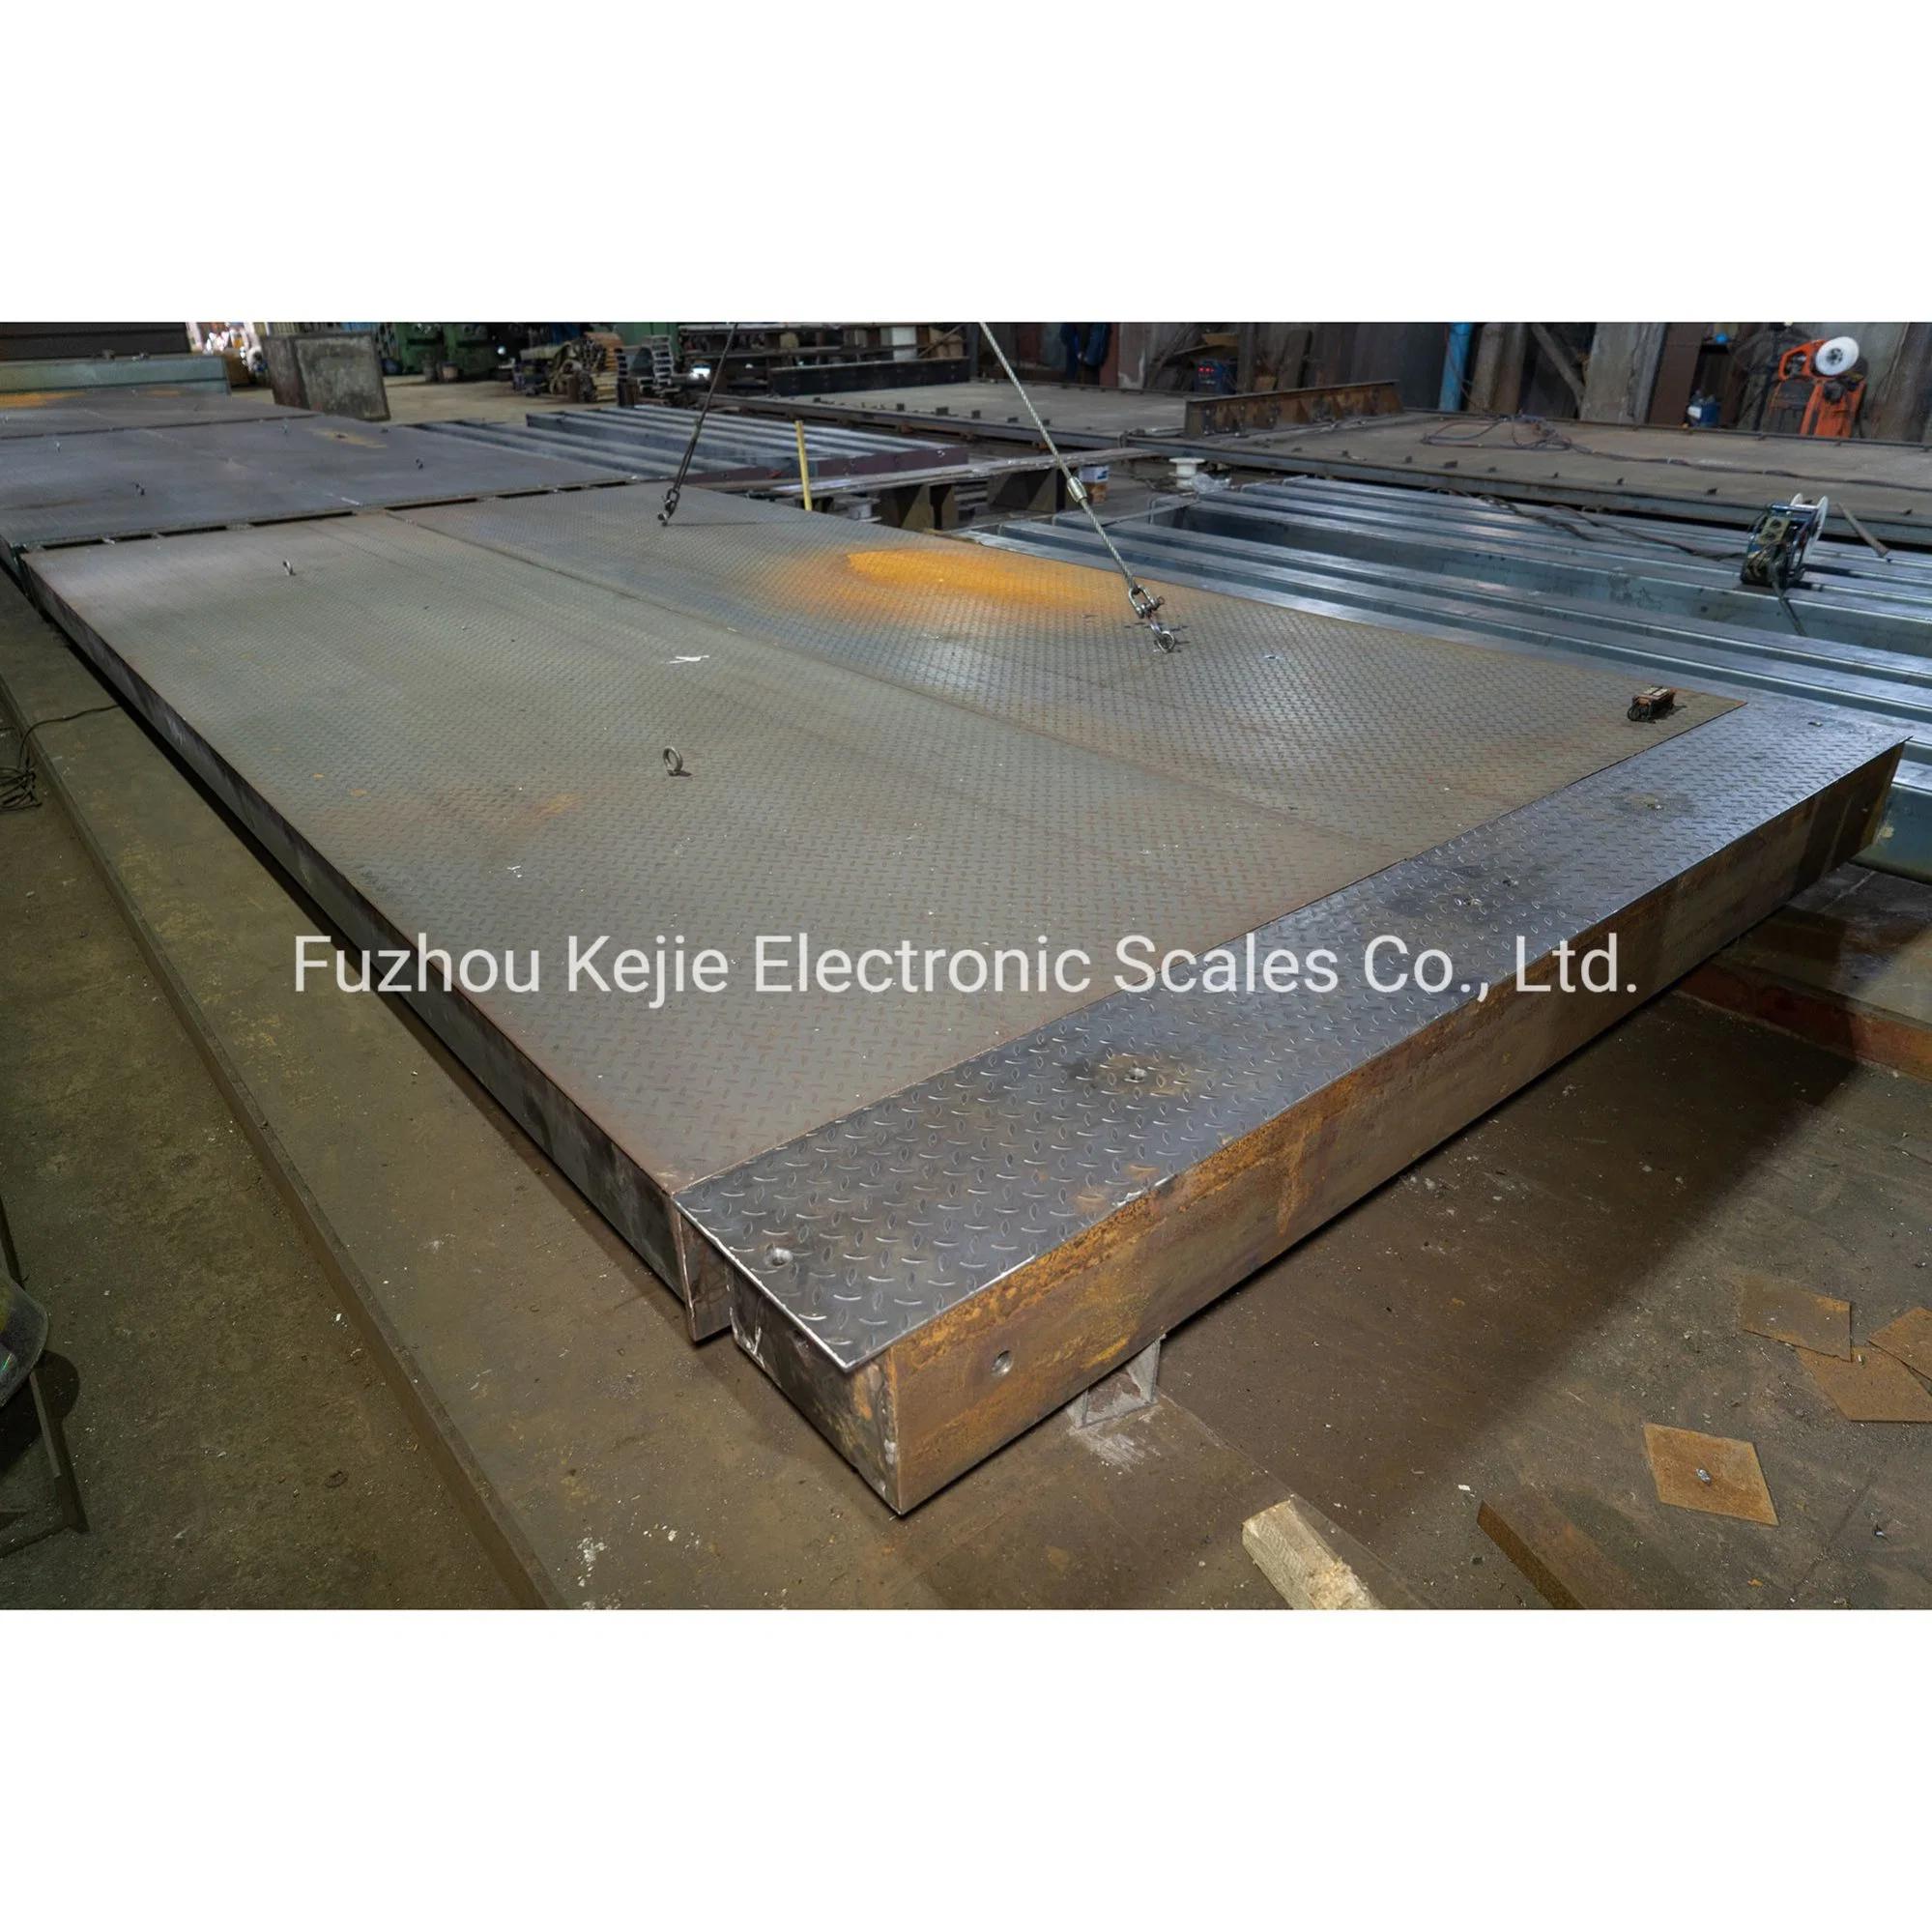 China Kejie Factory 60t 3X16m /18m /20m /24m Steel Deck Truck Weighbridge /Truck Scale with or Without Weighing Controller for Industrial Application